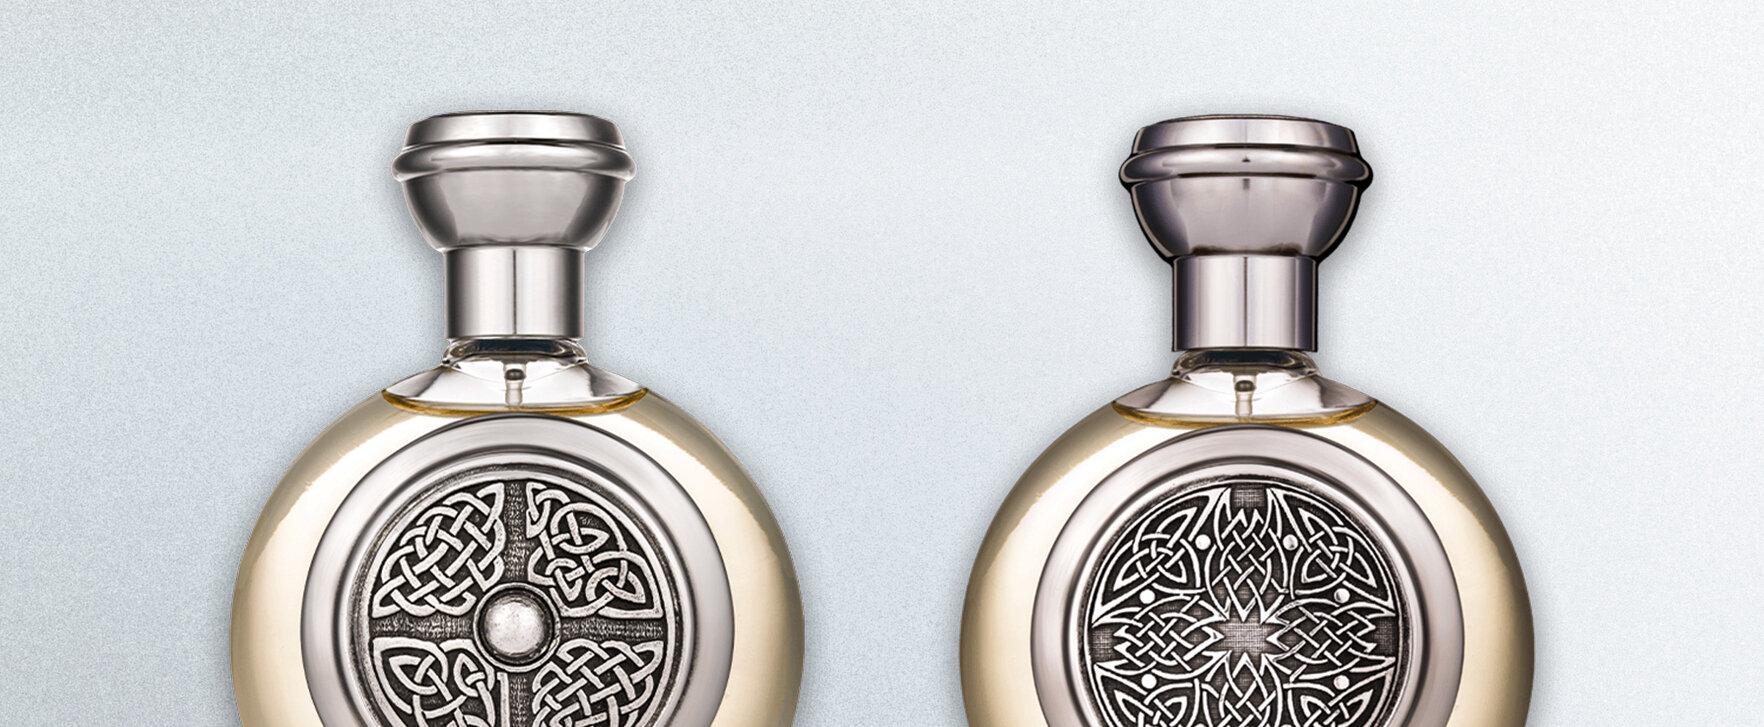 “Gentle” and “Ice Twist” - Boadicea the Victorious Launches Two New Fragrances